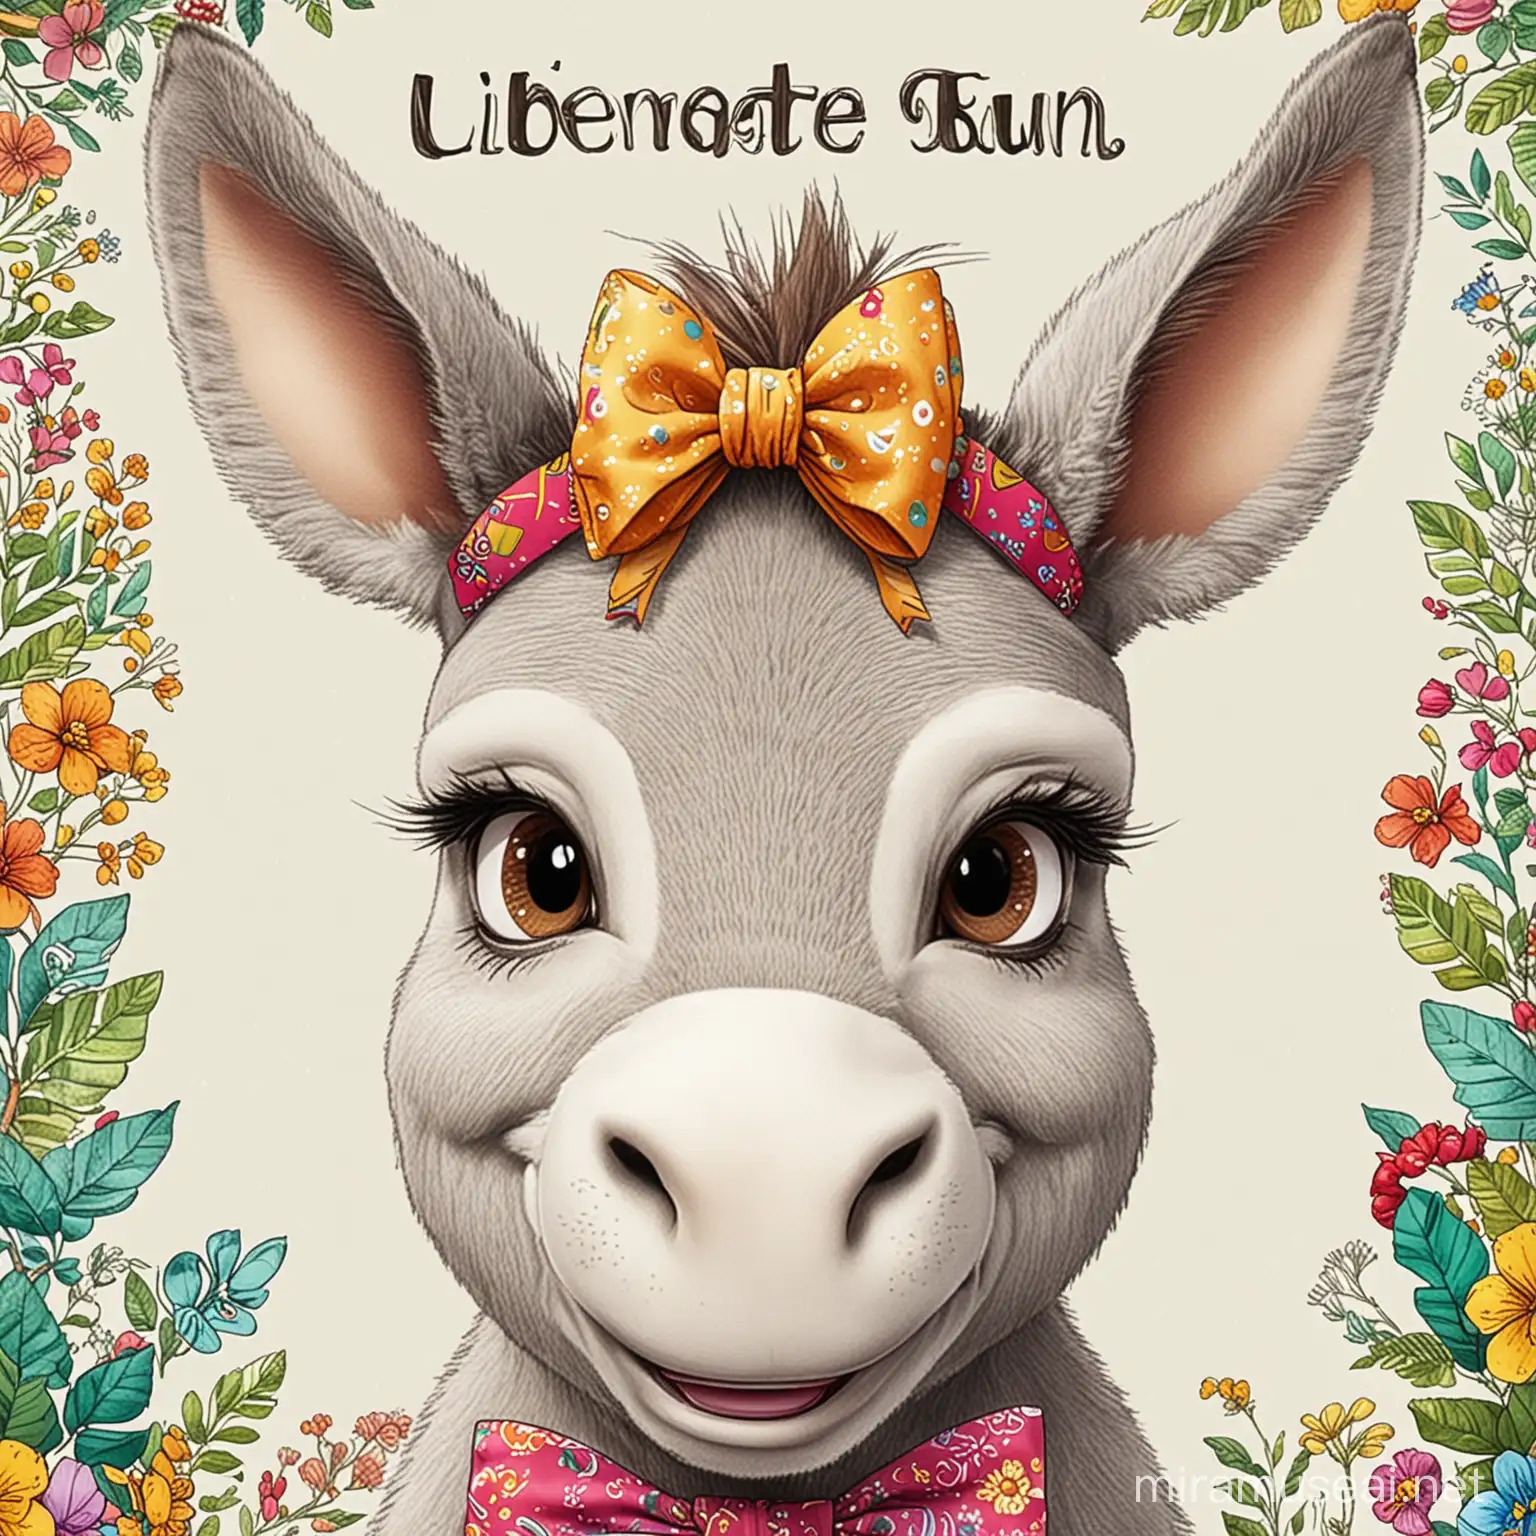 Cheerful Donkey Coloring Book Cover Smiling Donkey with Bow in Vibrant Colors